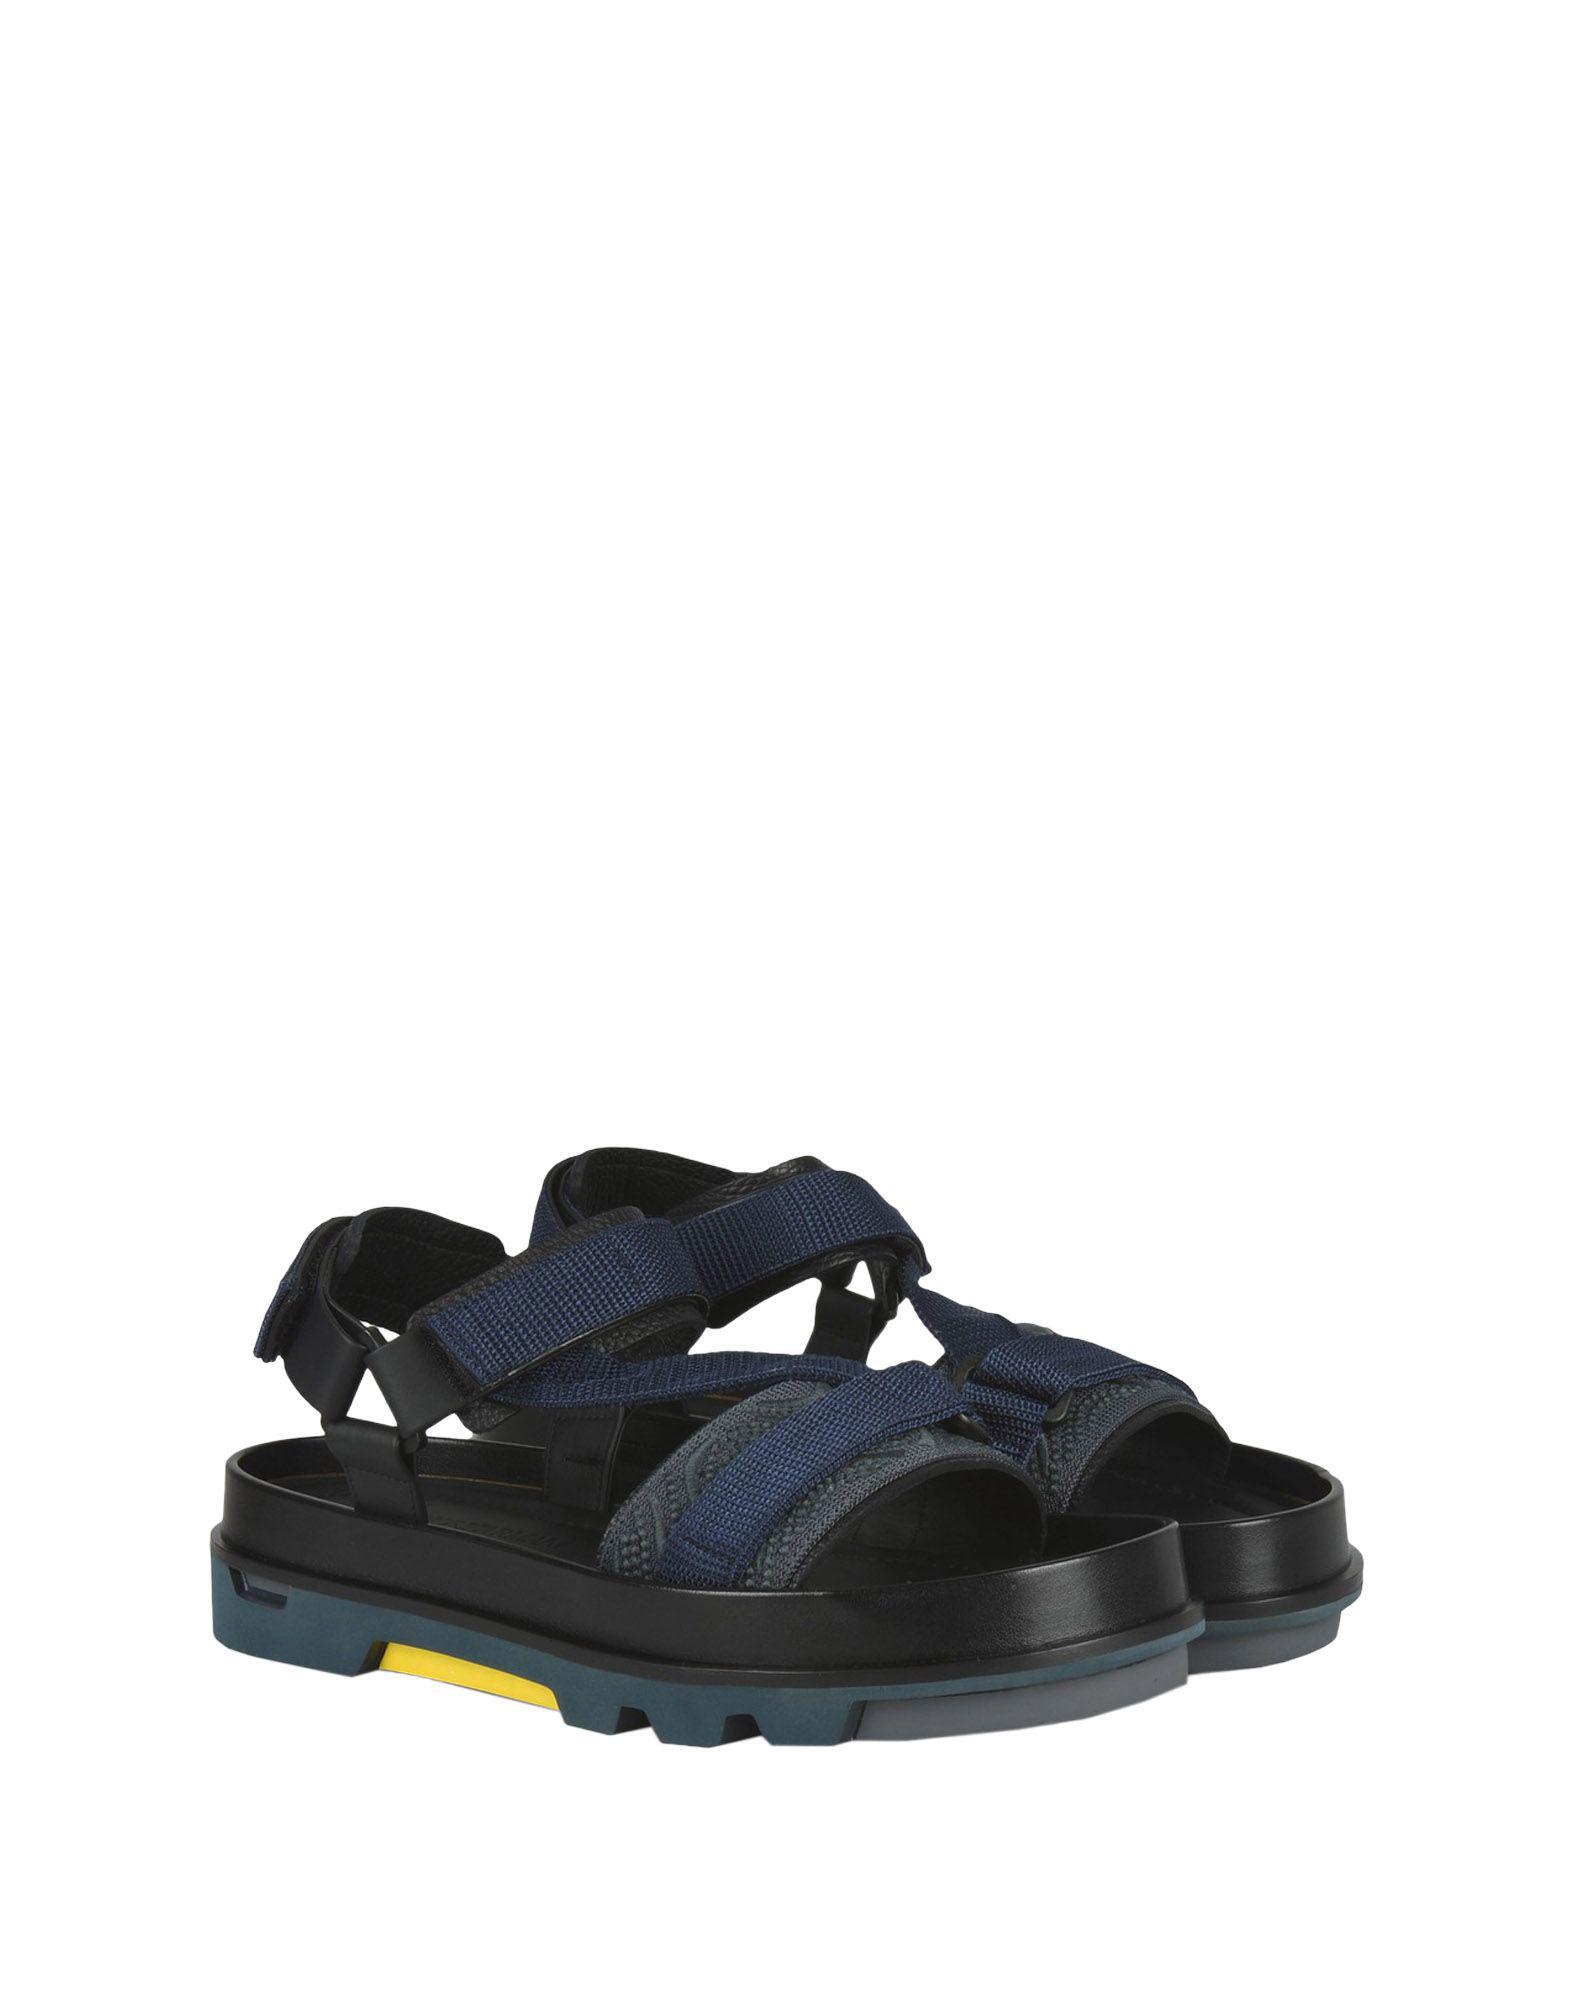 Emporio Armani Leather Sandals in Blue for Men - Lyst